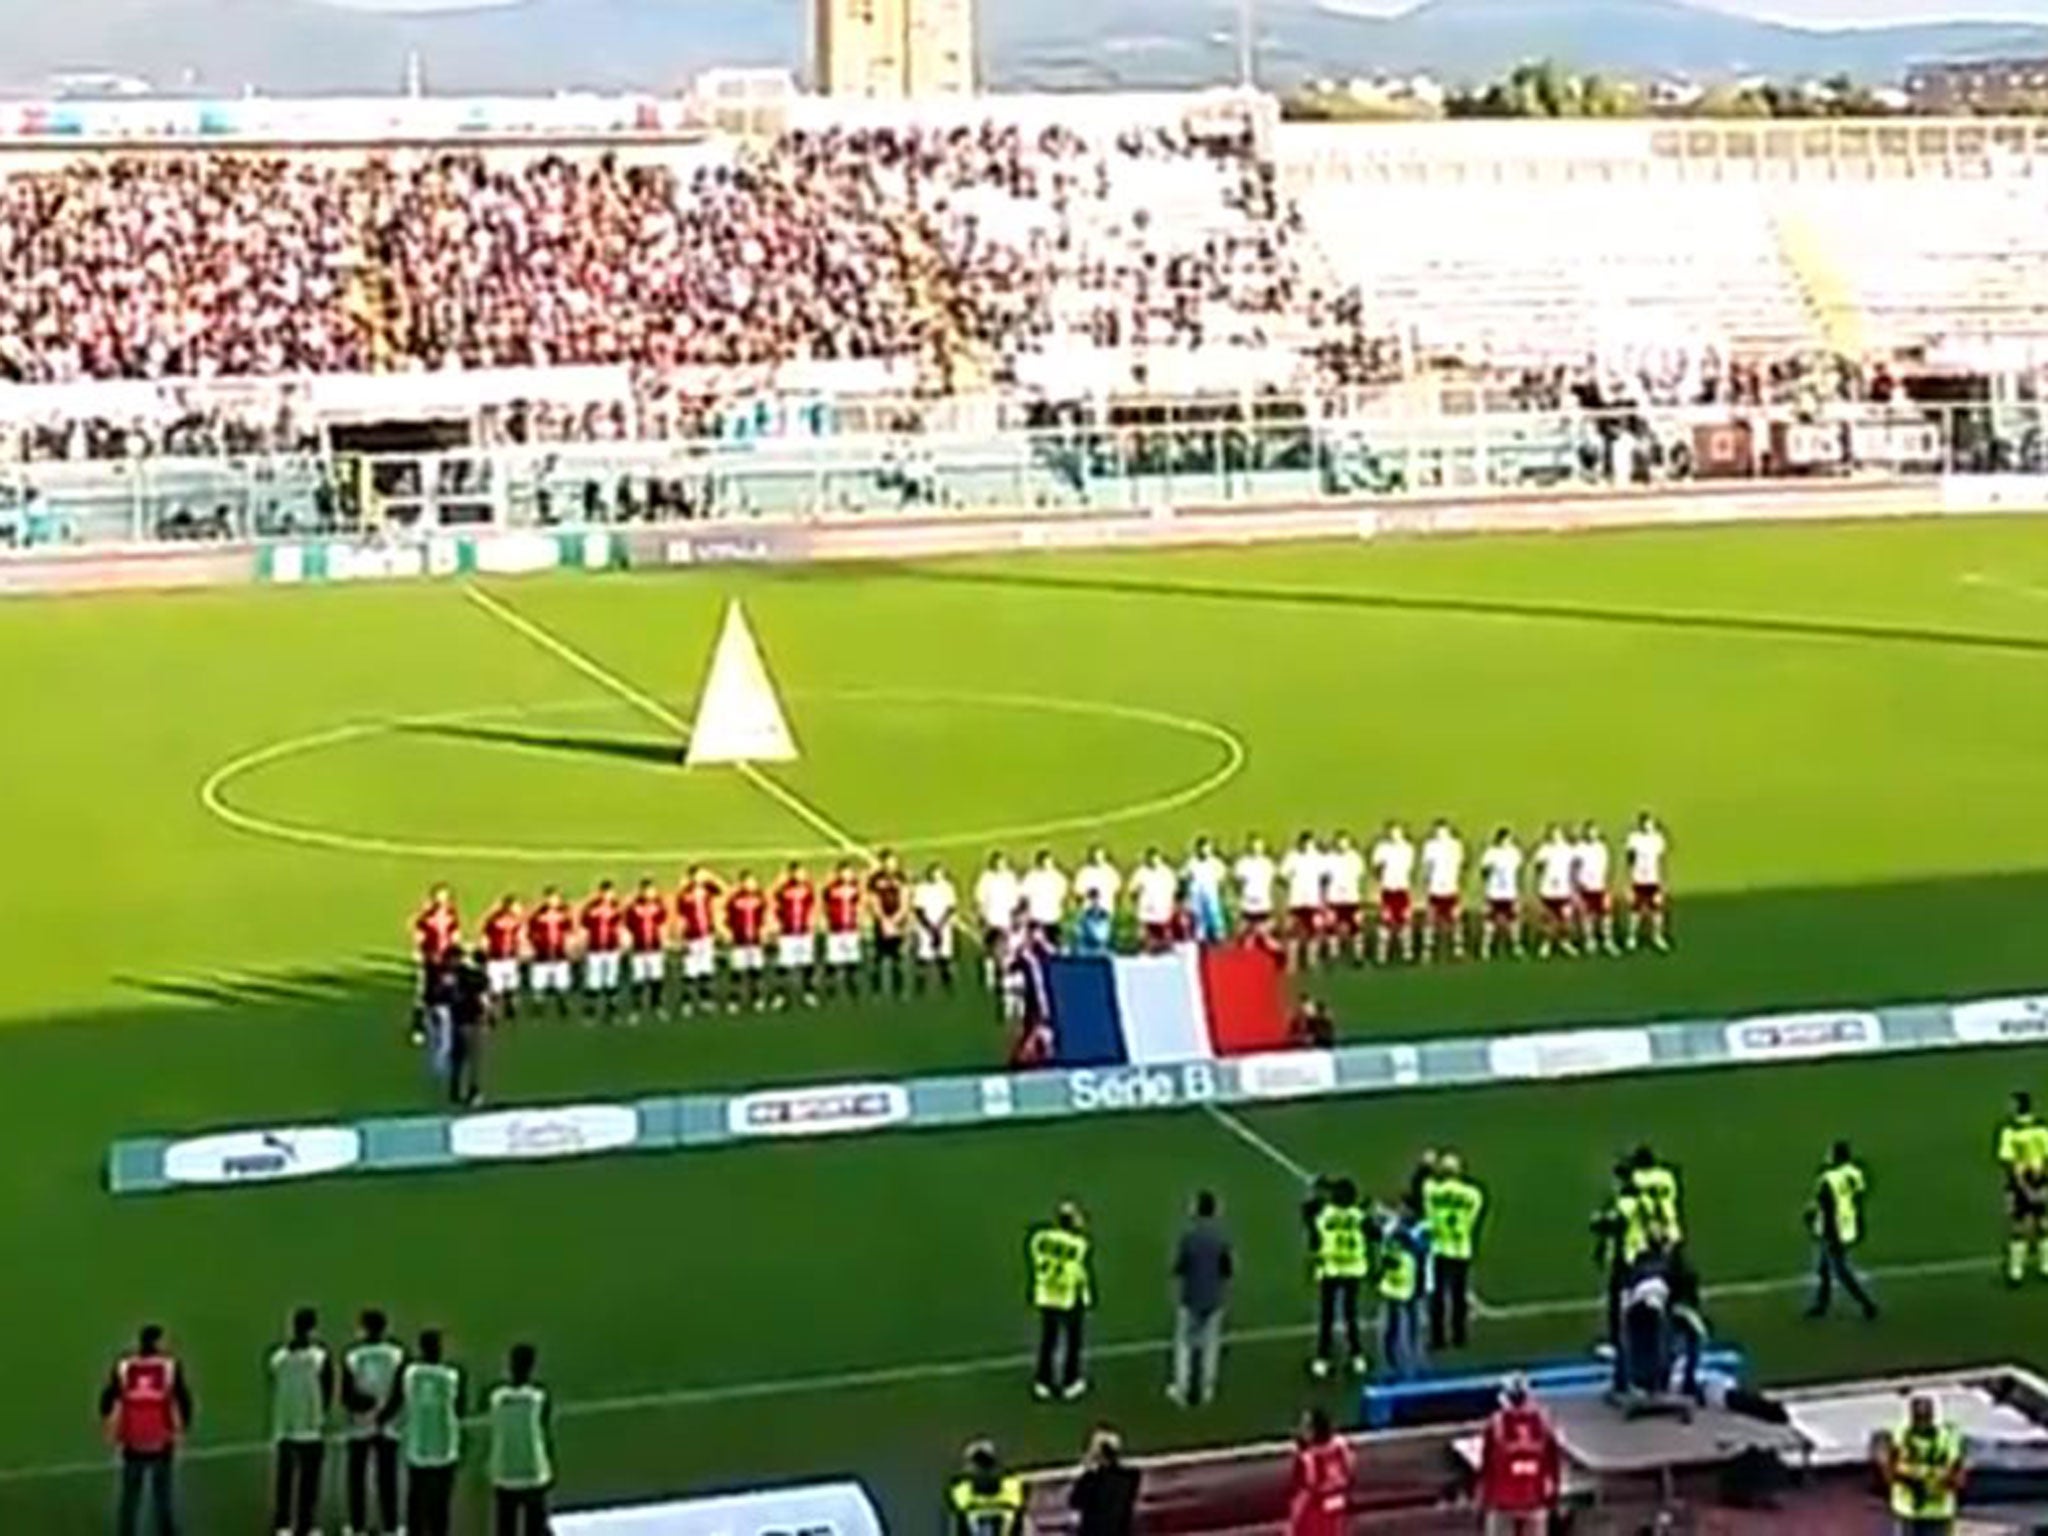 Livorno and Vincenza players pay tribute to the victims of the Paris terror attacks